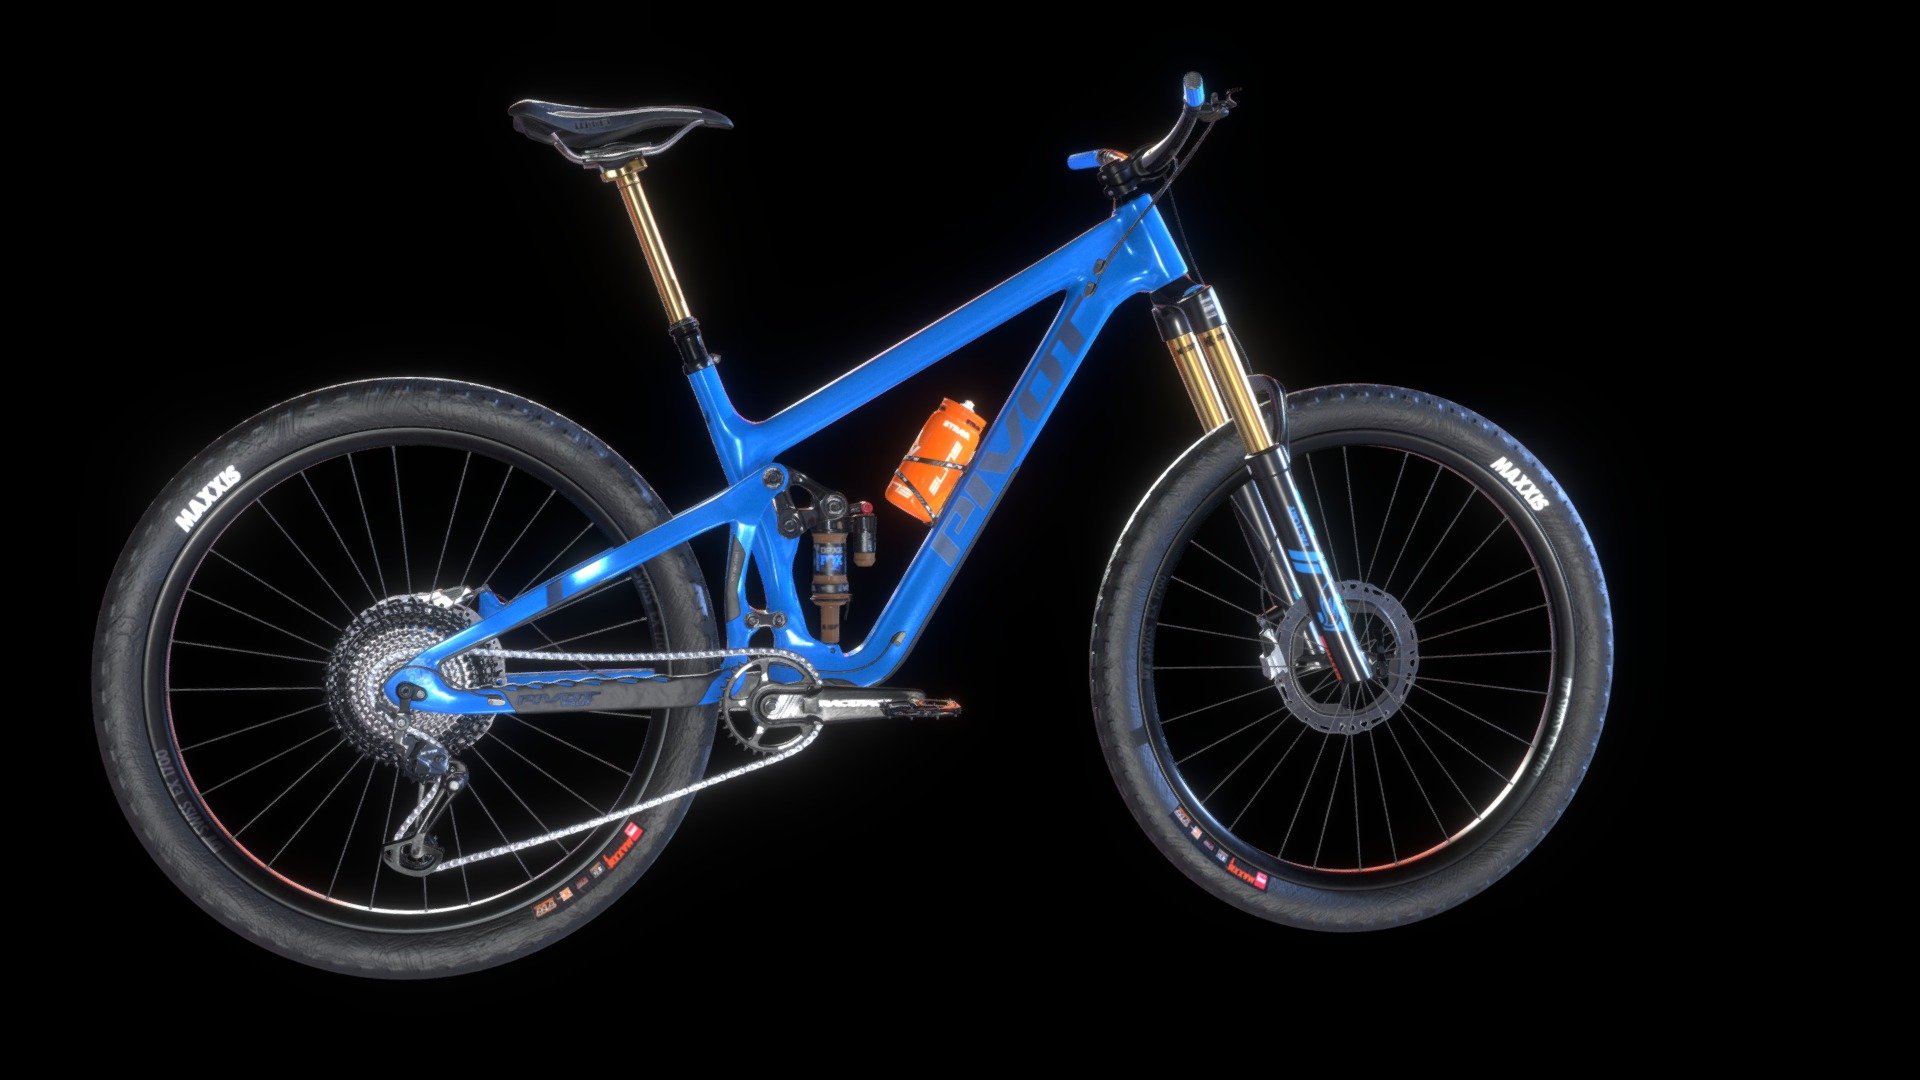 Pivot Switchable ENDURO/MTB bike modeled entirely in Blender.
UV in RIZOMUV and textured with Substance Painter and Photoshop. 
Two materials (=two PBR texture sets) 4k each. PBR textures for cycles, vray and standard PBR included. 
&lsquo;Low' poly is 237k polys. Whole bike is consist of 39 different objects accordingly named.
Blue version of real bike's paint is matte but I went for shiny one in this case.
There are two other color schames for this bike which I might consider doing later 3d model